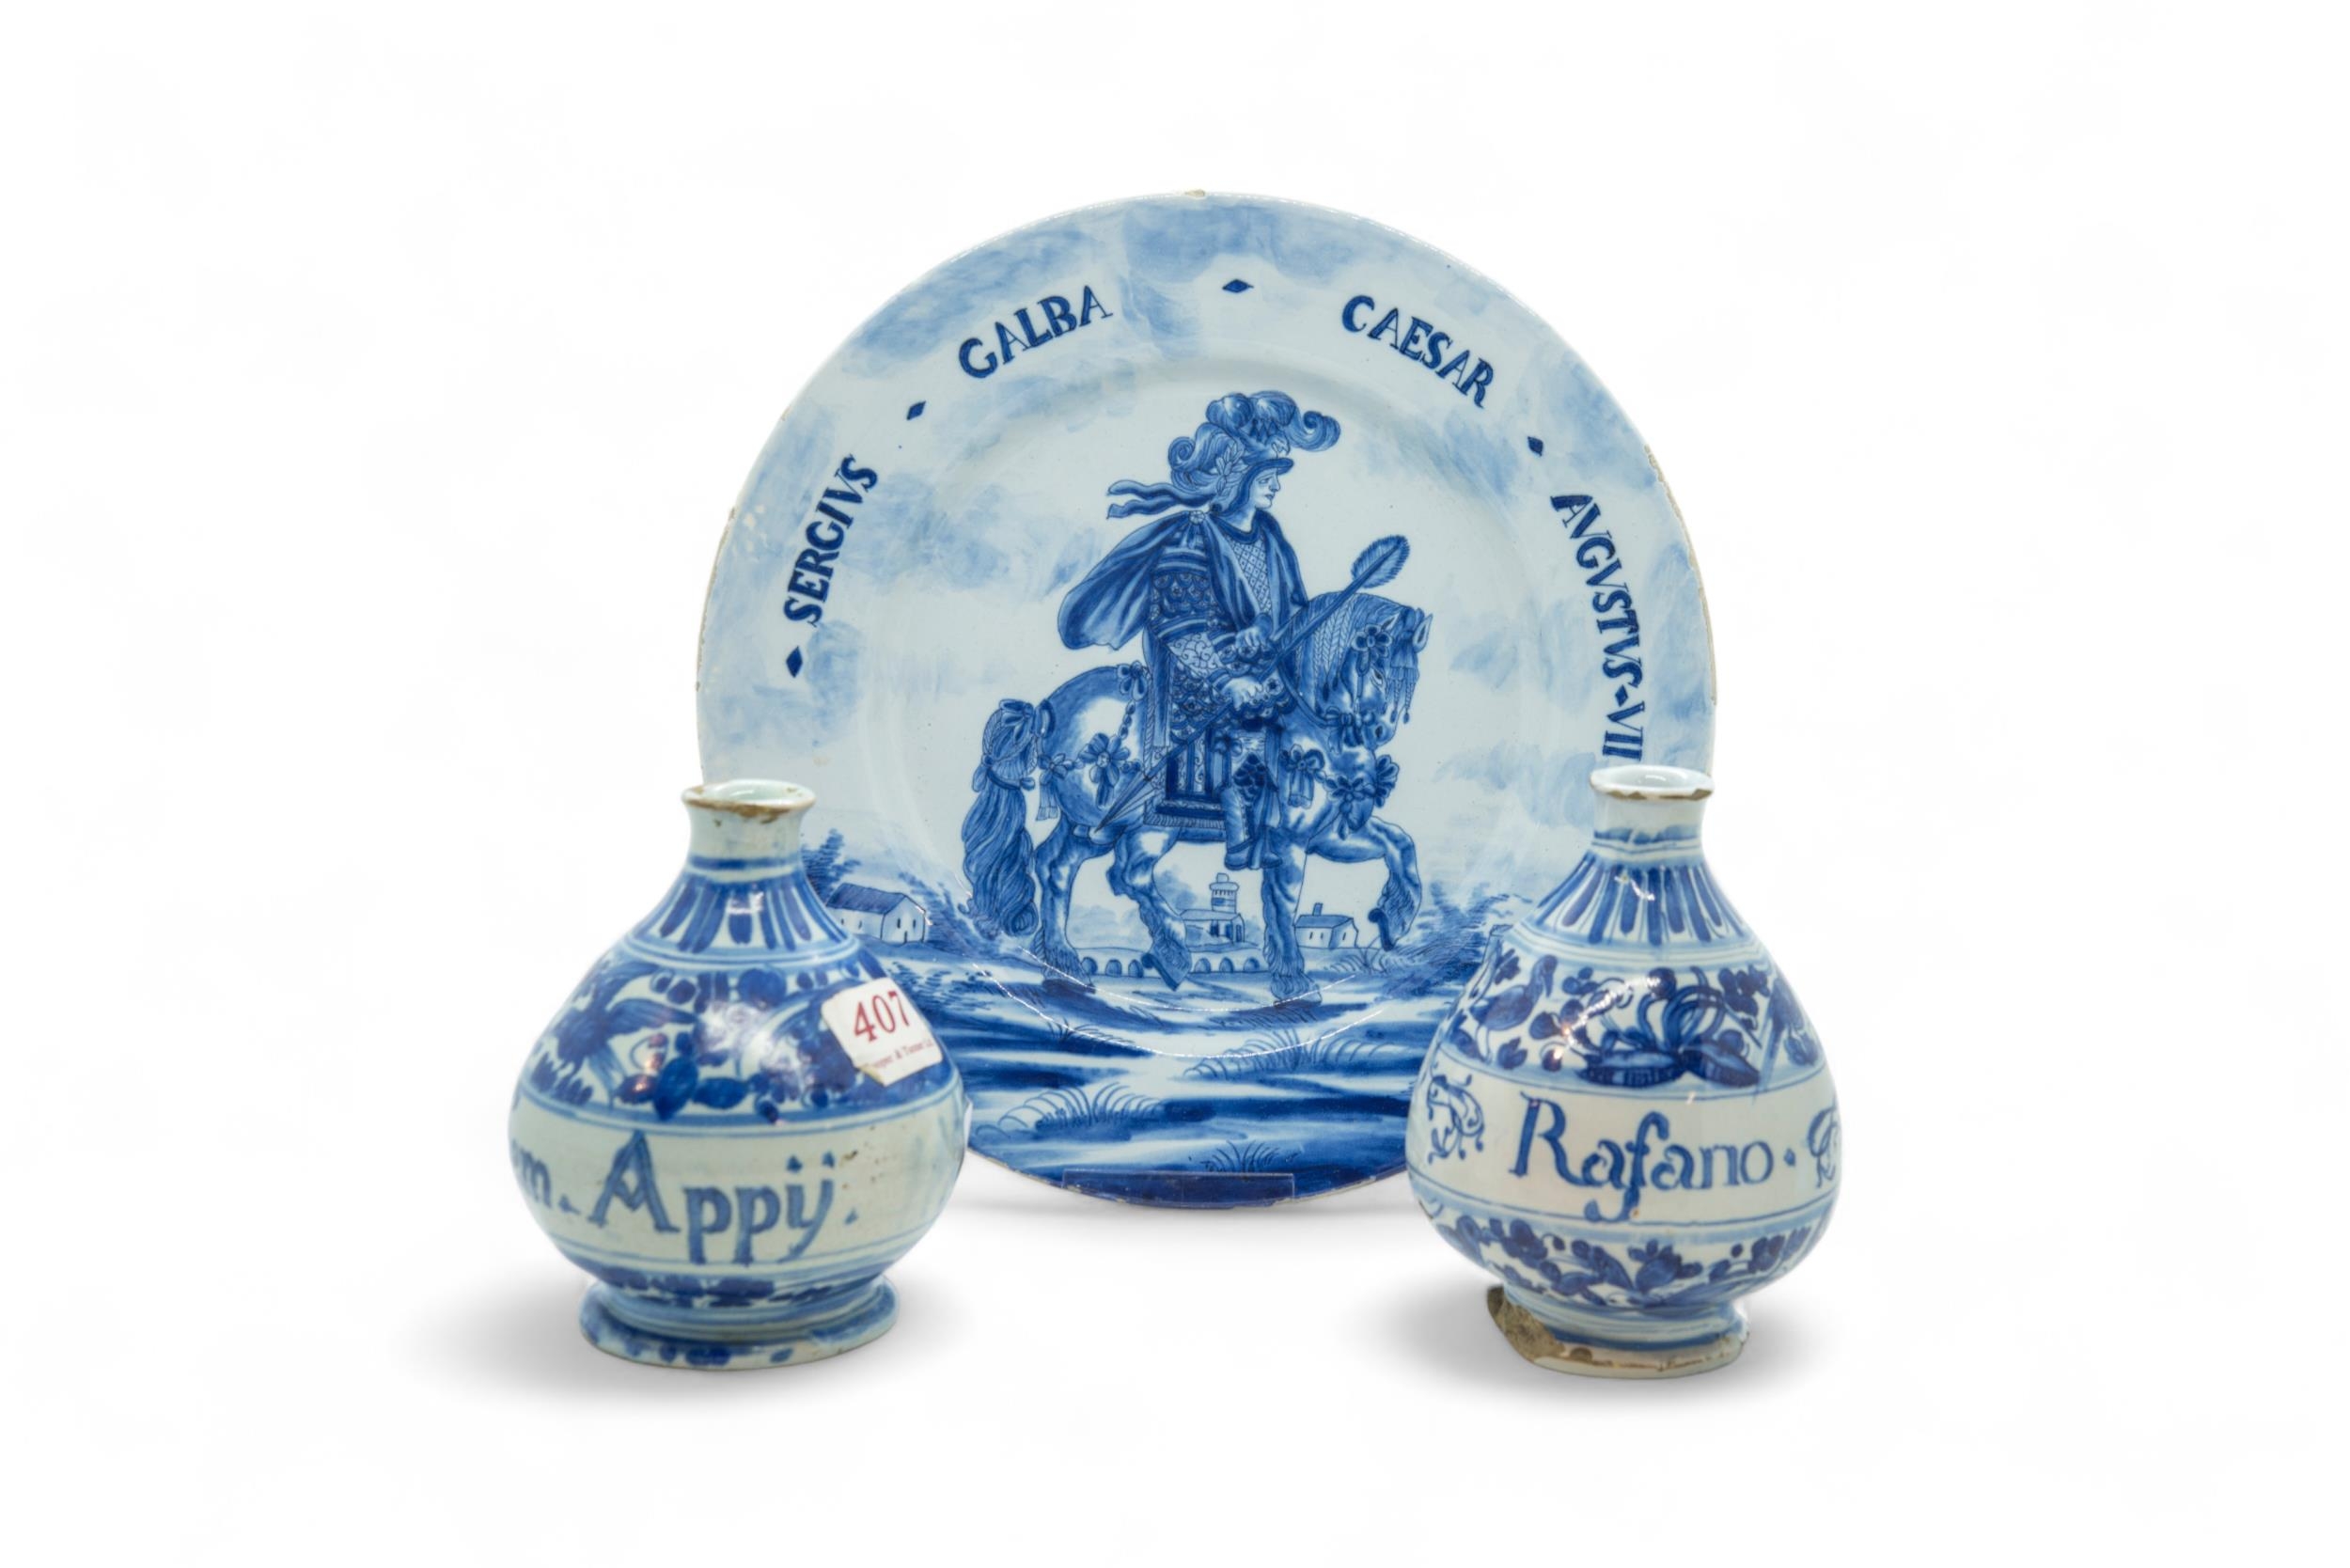 TWO PHARMACY BOTTLES 17th / 18th century, together with a Savona plate inscribed 'SERGIVS GALBA